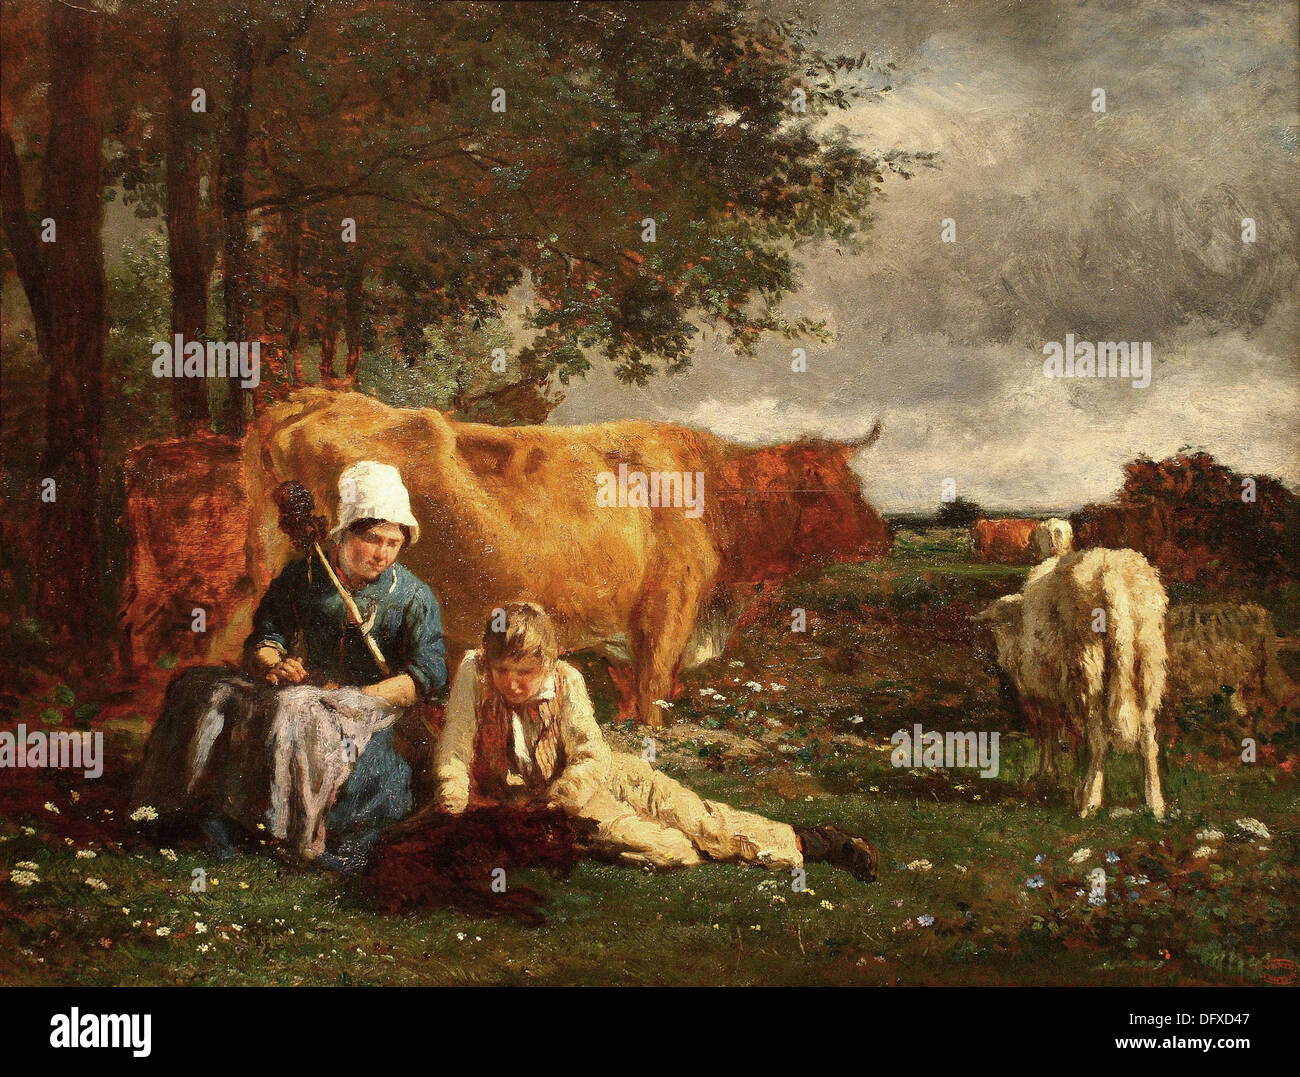 Constant TROYON -Pastoral scene - 1860 - Museum of Fine Arts - Budapest, Hungary. Stock Photo